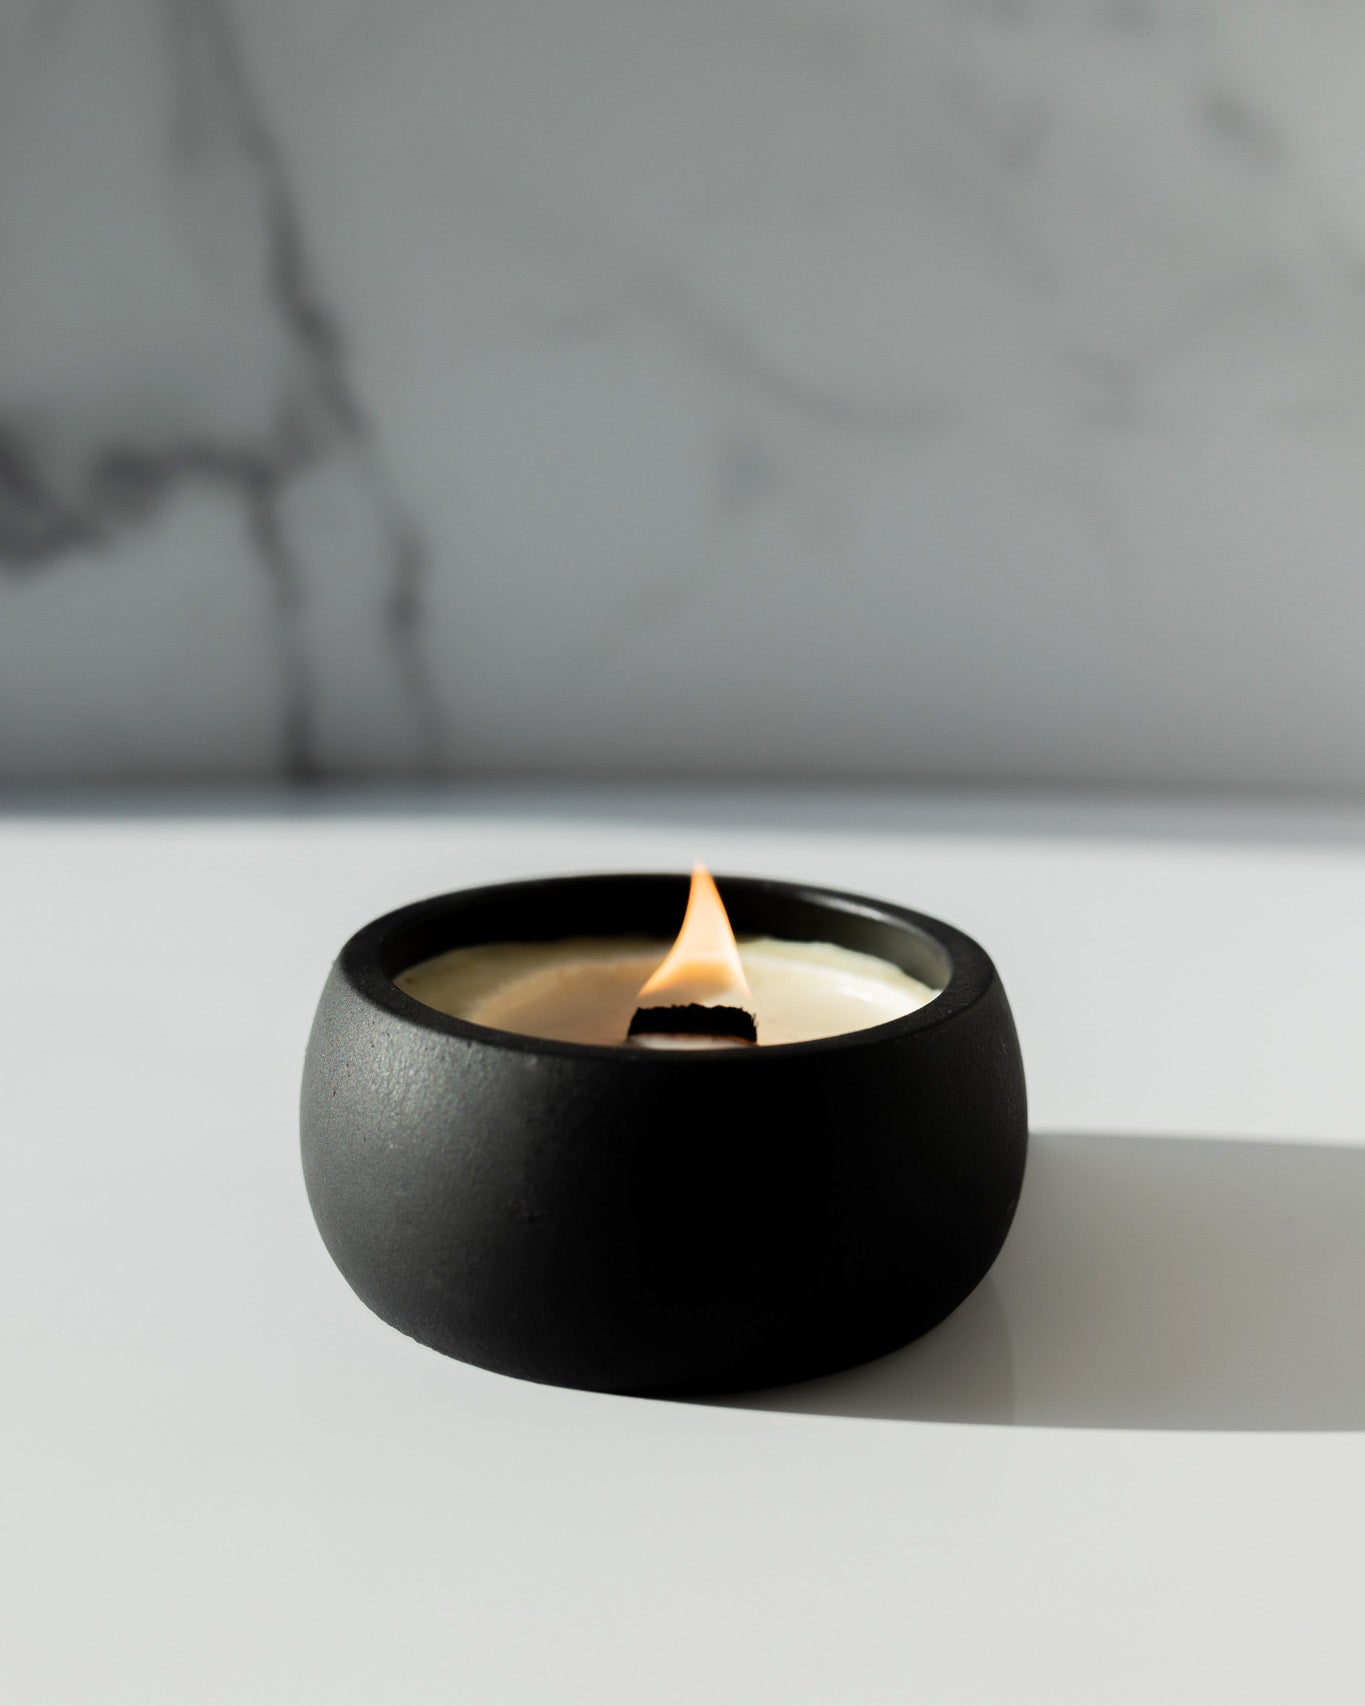 Roses On My Mind Coconut Soy Wax - Black Concrete Wood Wick Candles